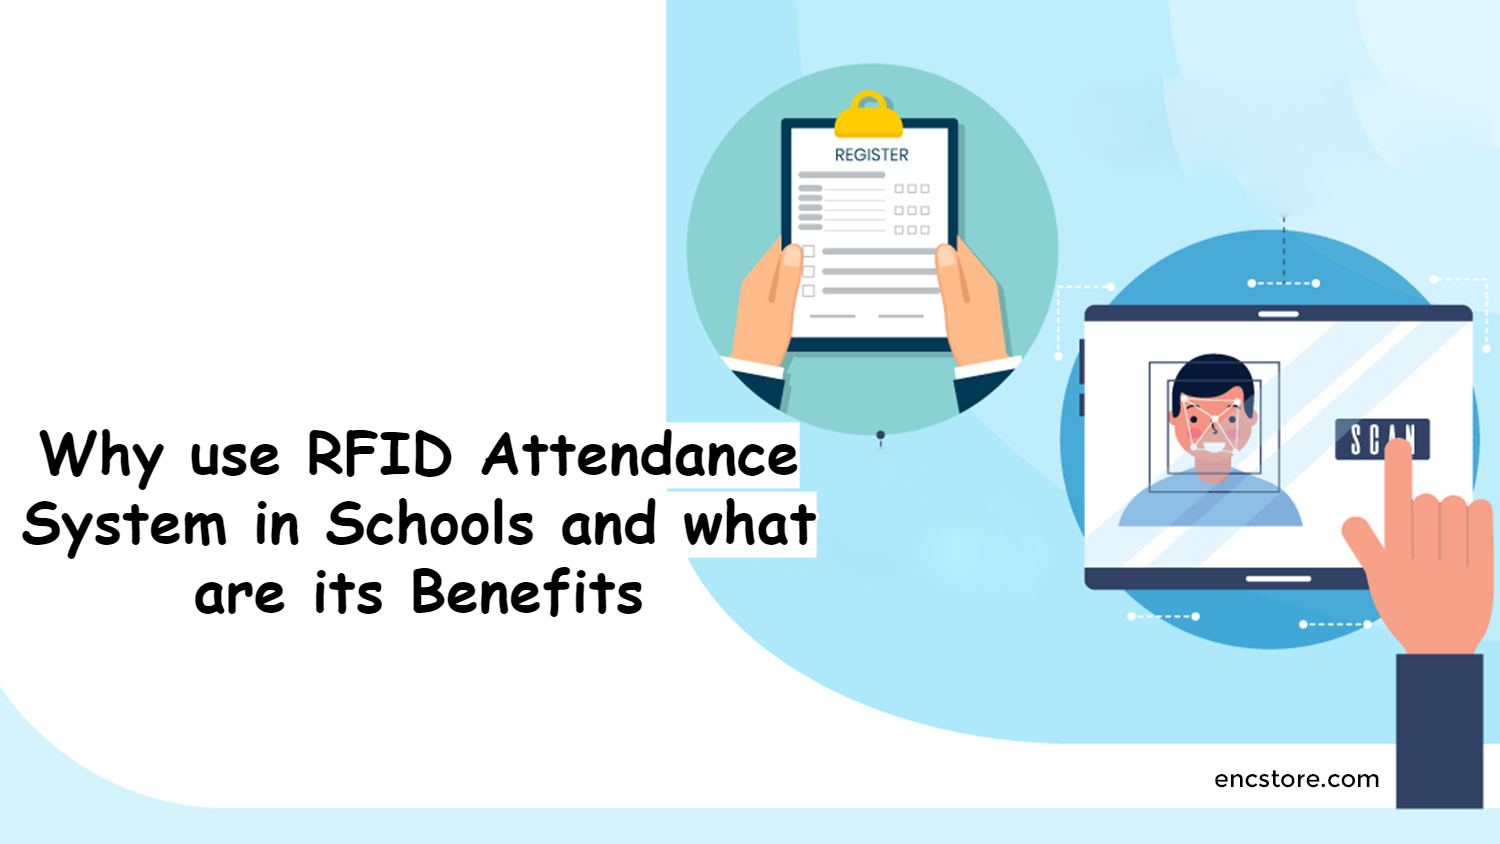 Why use RFID Attendance System in Schools and what are its Benefits